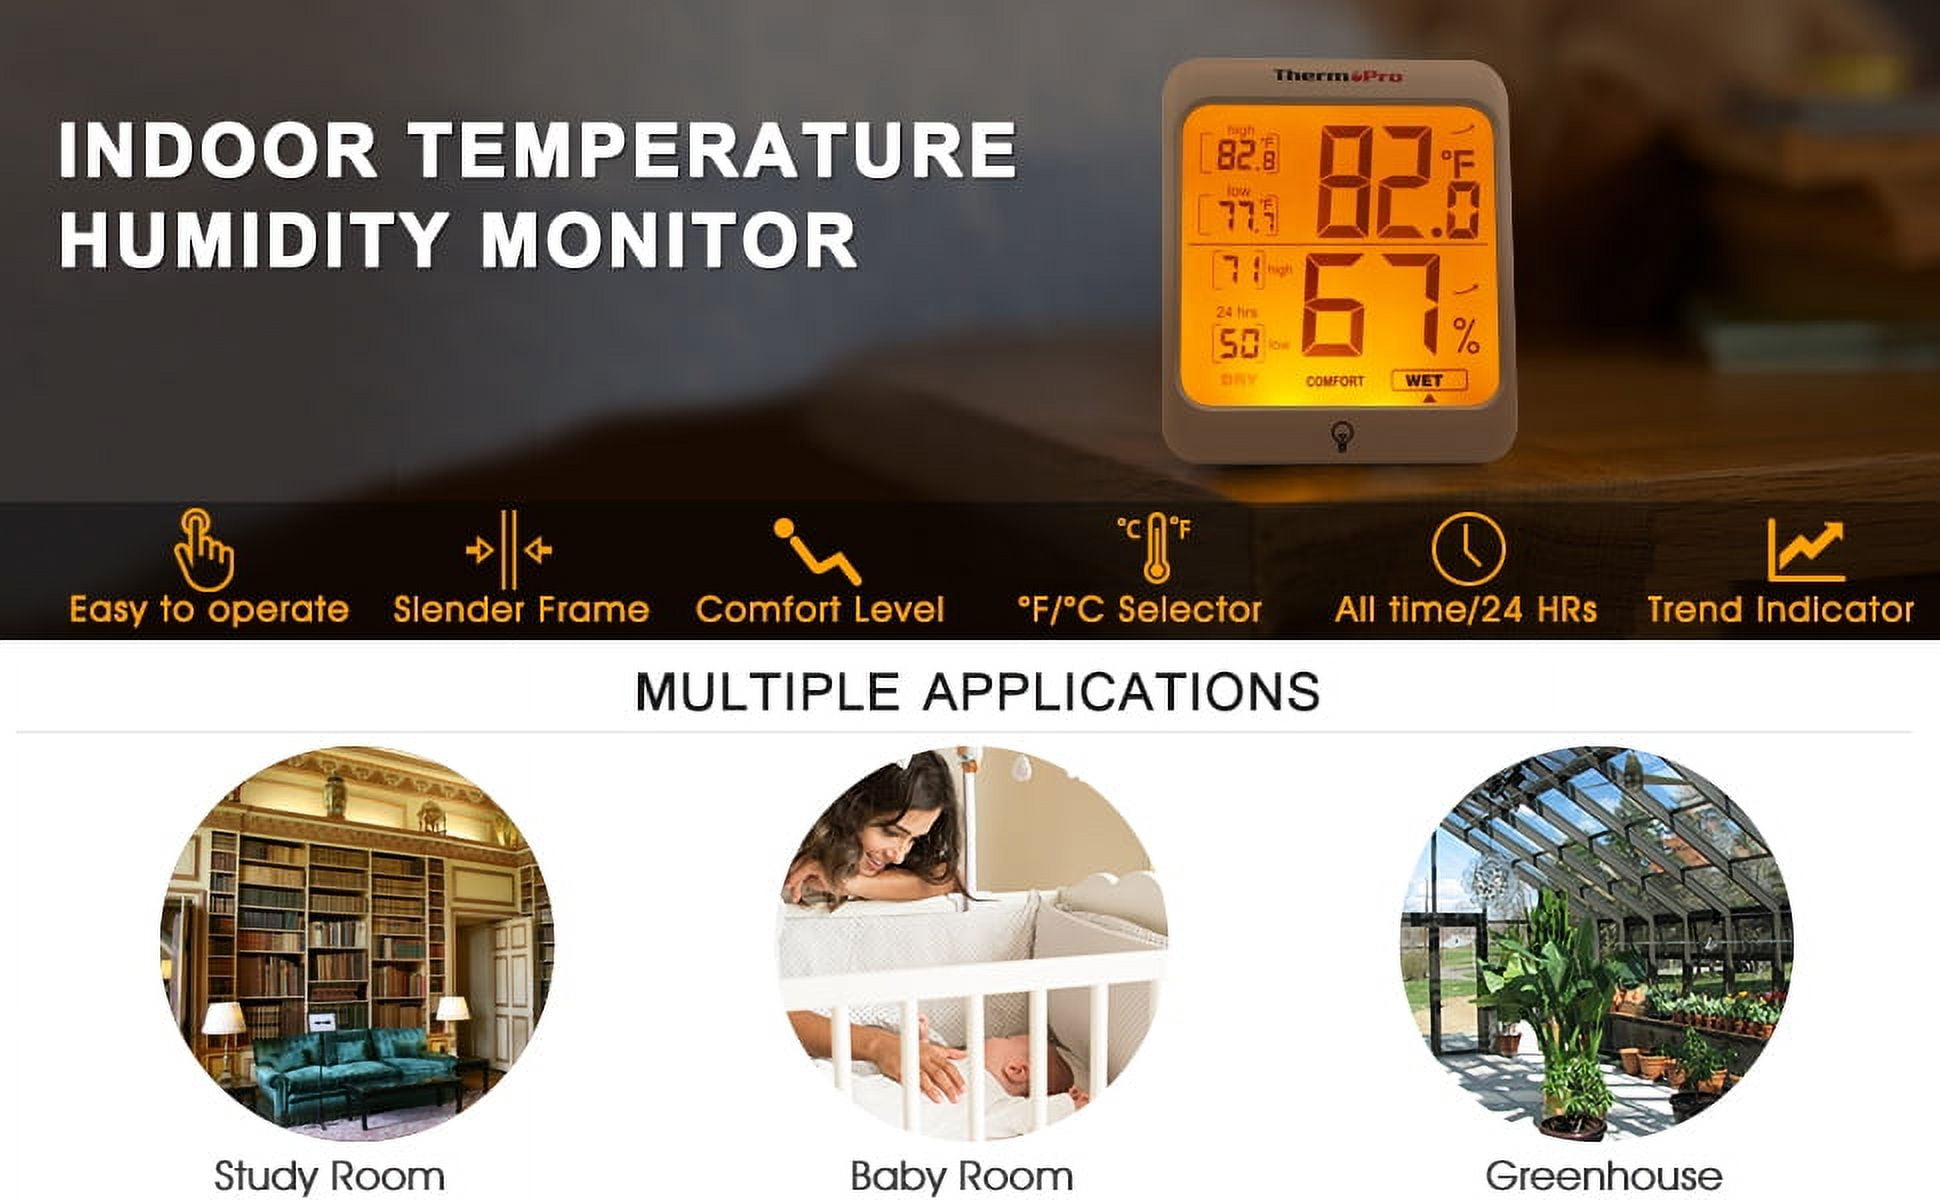 ThermoPro TP53 Hygrometer Touch Screen Indoor Outdoor Thermometer